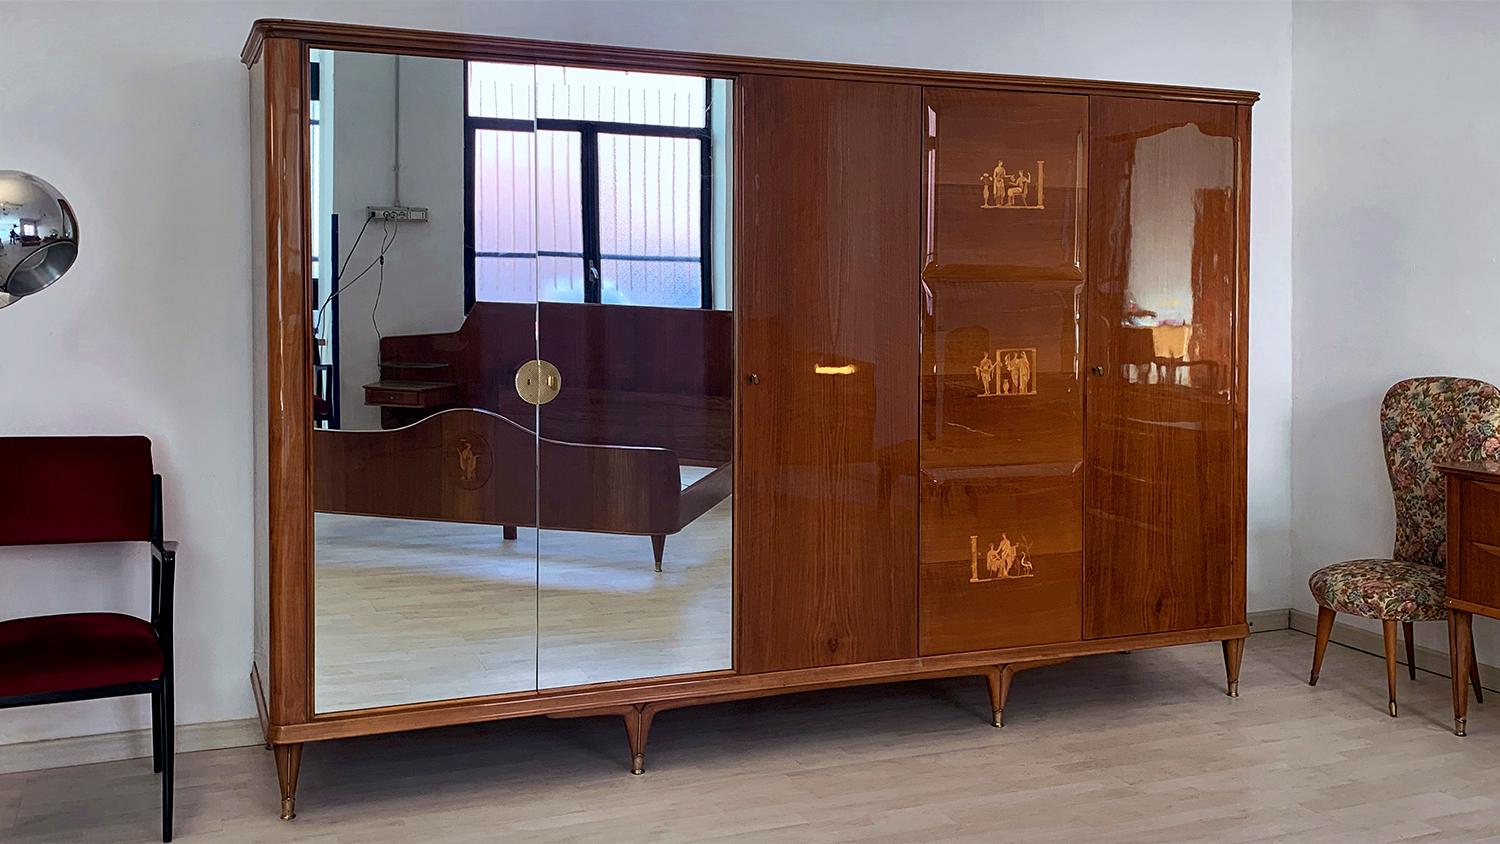 For your consideration this stylish Italian bedroom suite of the 1950s, composed by Chest of drawers with mirror and Armoire 5 doors with mirrors, both attributed to the design of Paolo Buffa.

Both items have the structures made of a gorgeous